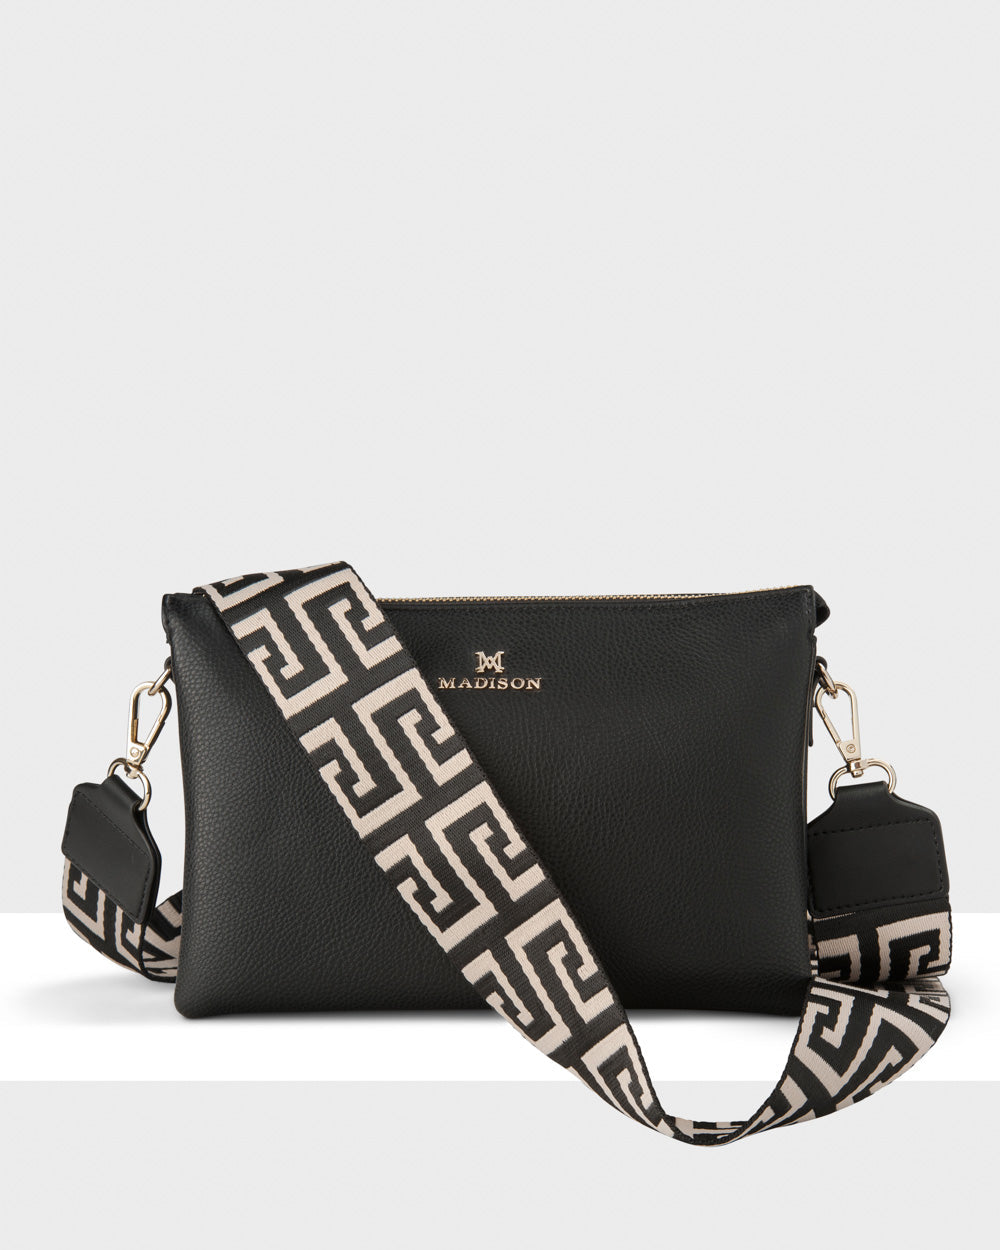 Avery 3 Compartment Crossbody Bag + Graphic Bag Strap